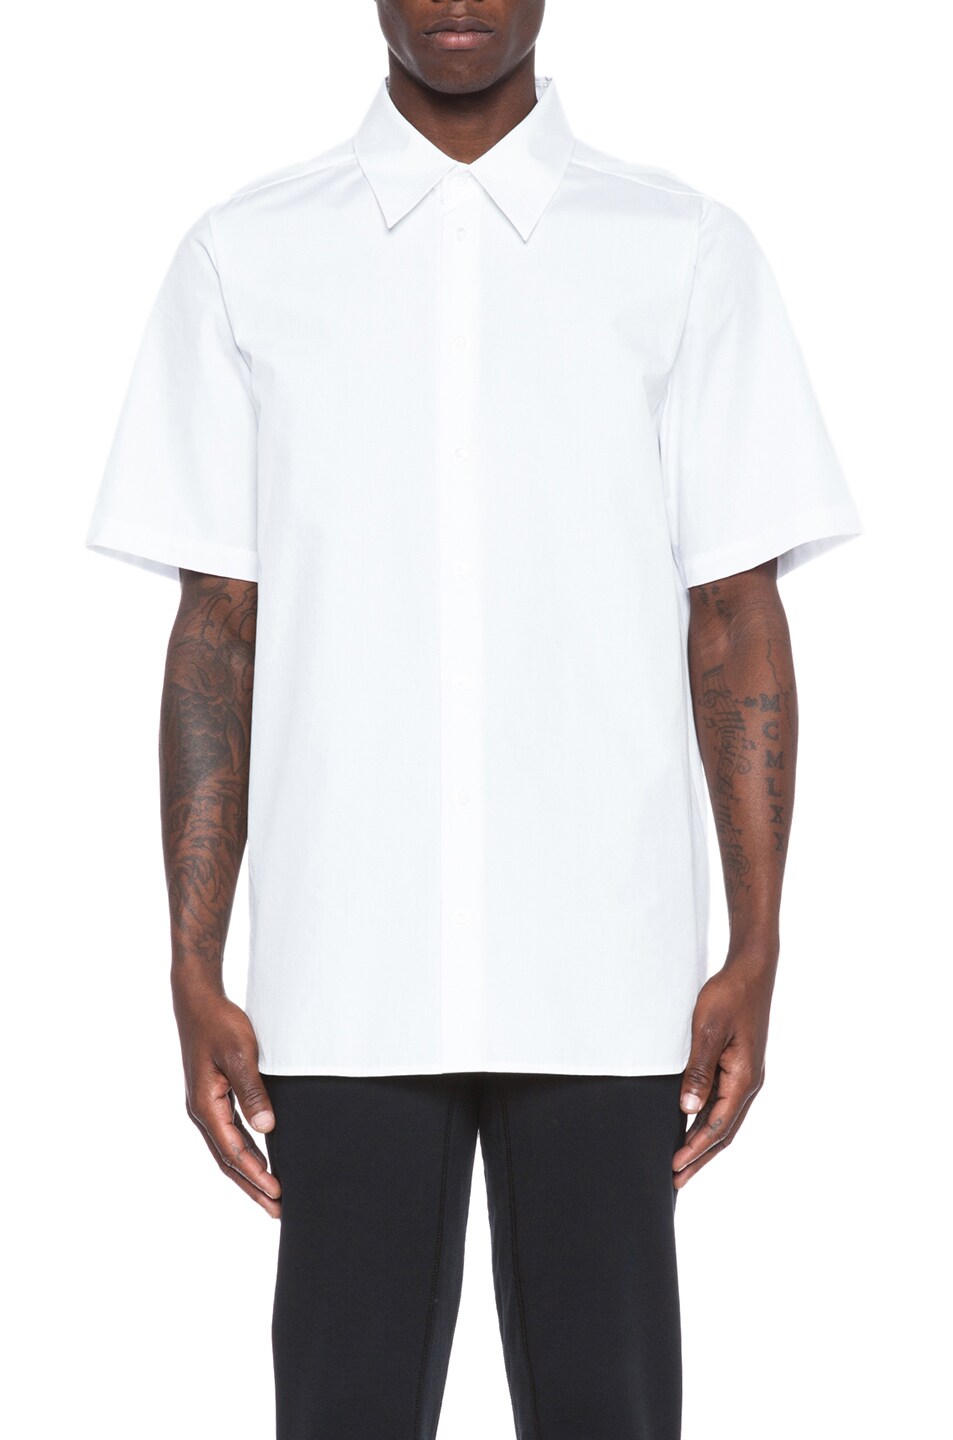 Image 1 of 3.1 phillip lim Dolman Sleeve Cotton Top in White